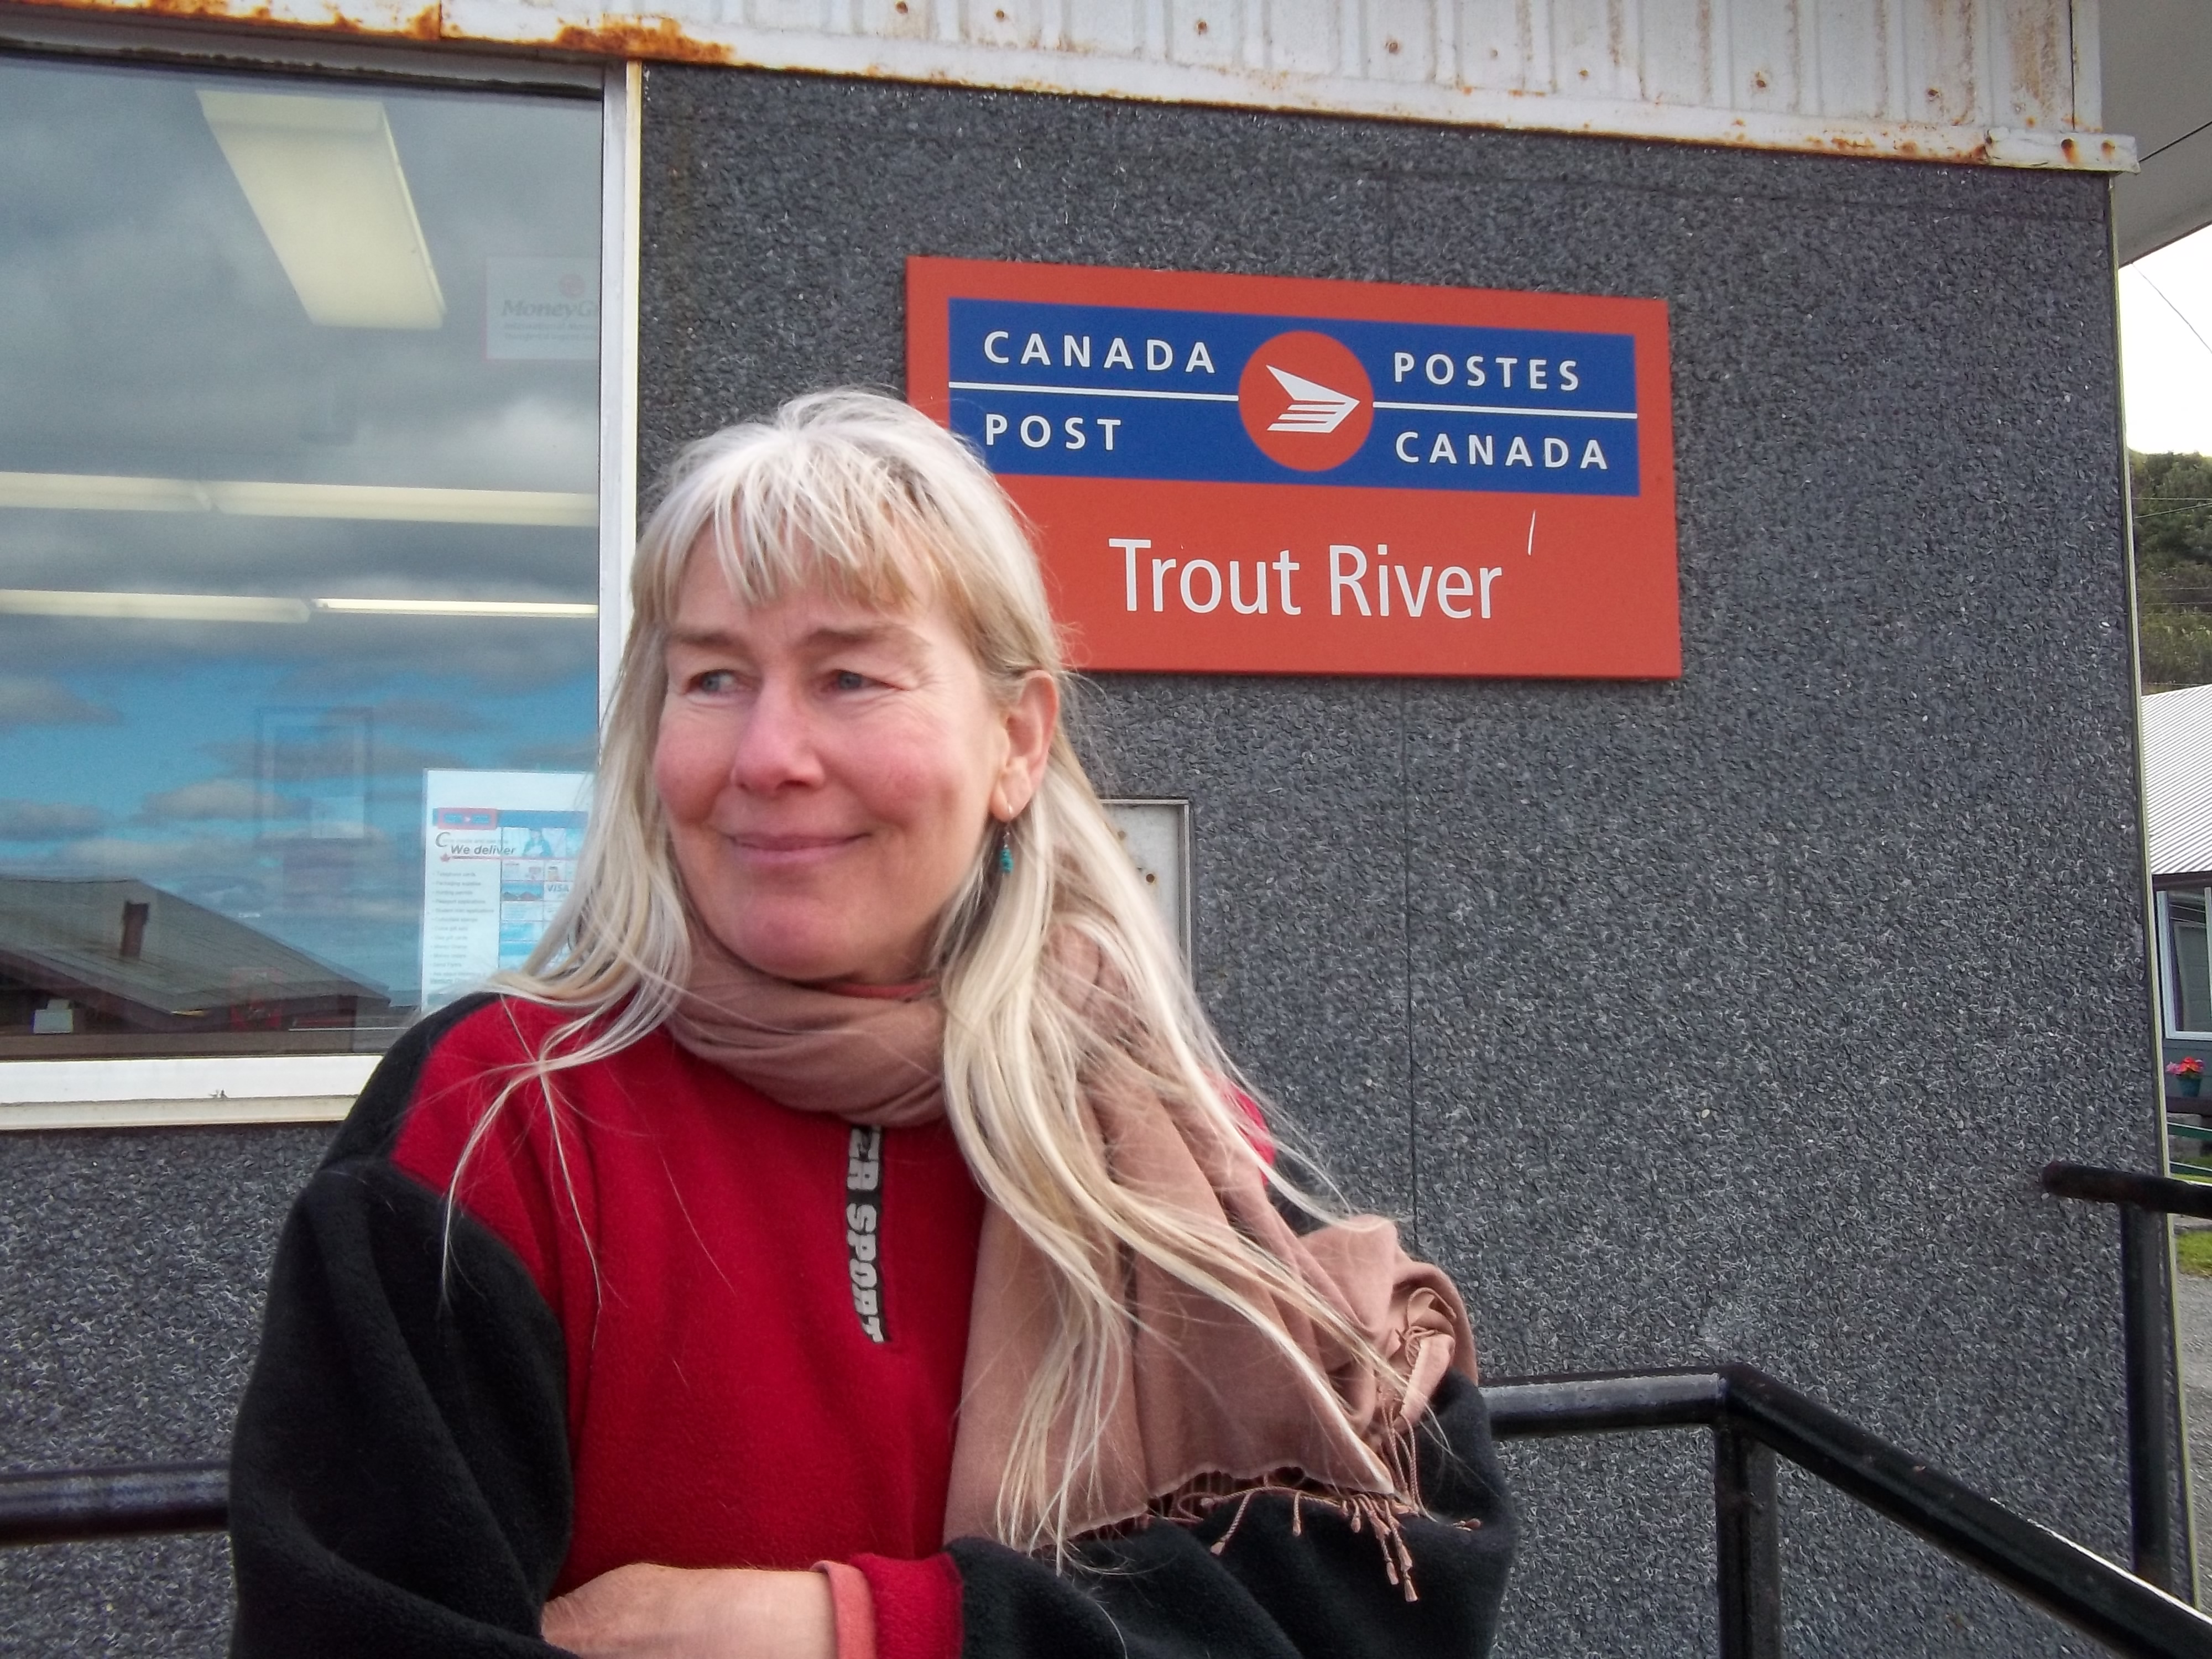 2013 09 20 Jessica Ernst loving Trout River Newfoundland company wanting to buy entire community to obliterate it for fracing